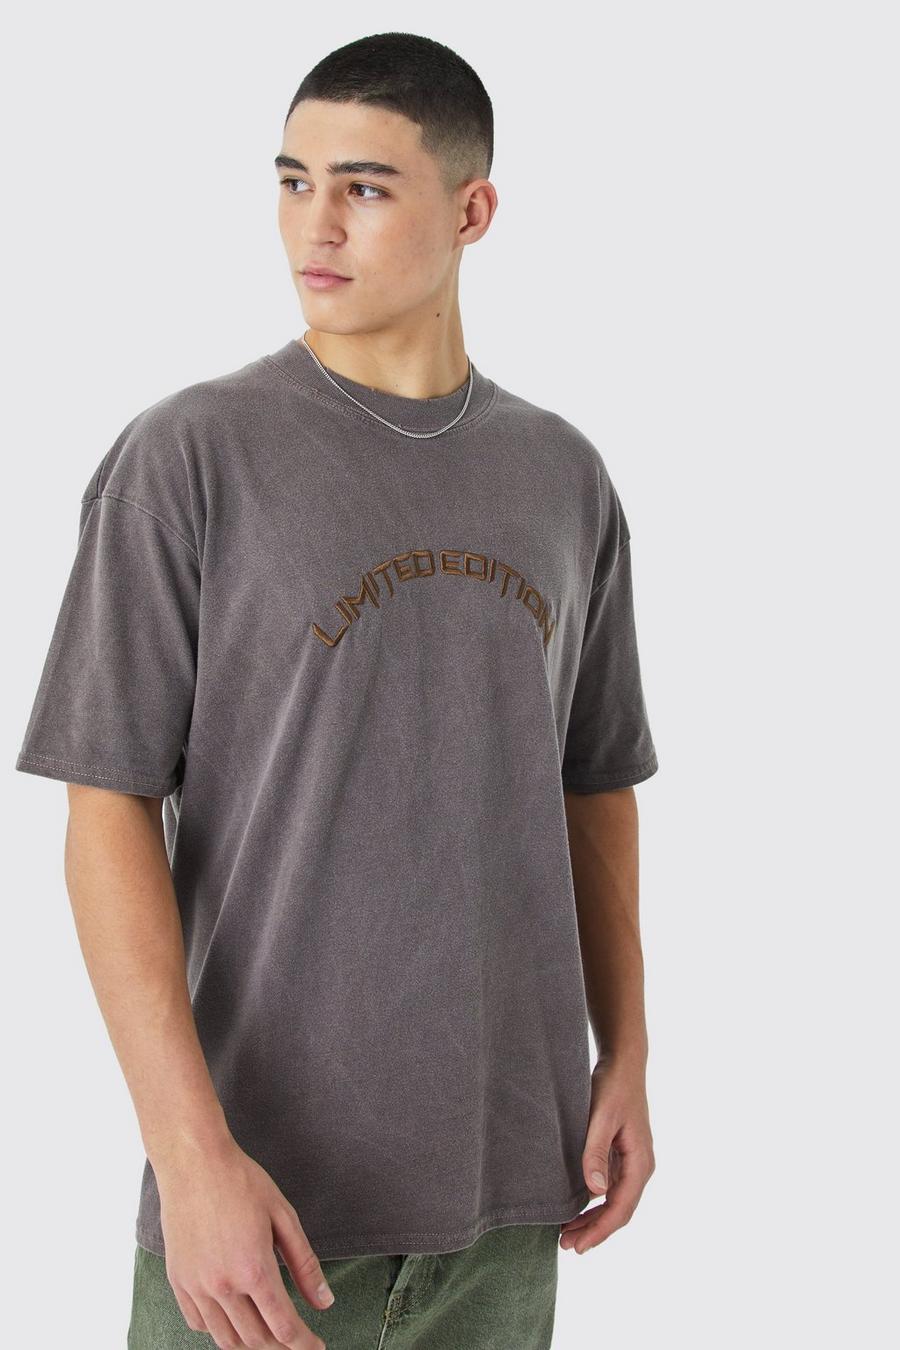 Chocolate Oversized Distressed Washed Embroidered T-shirt